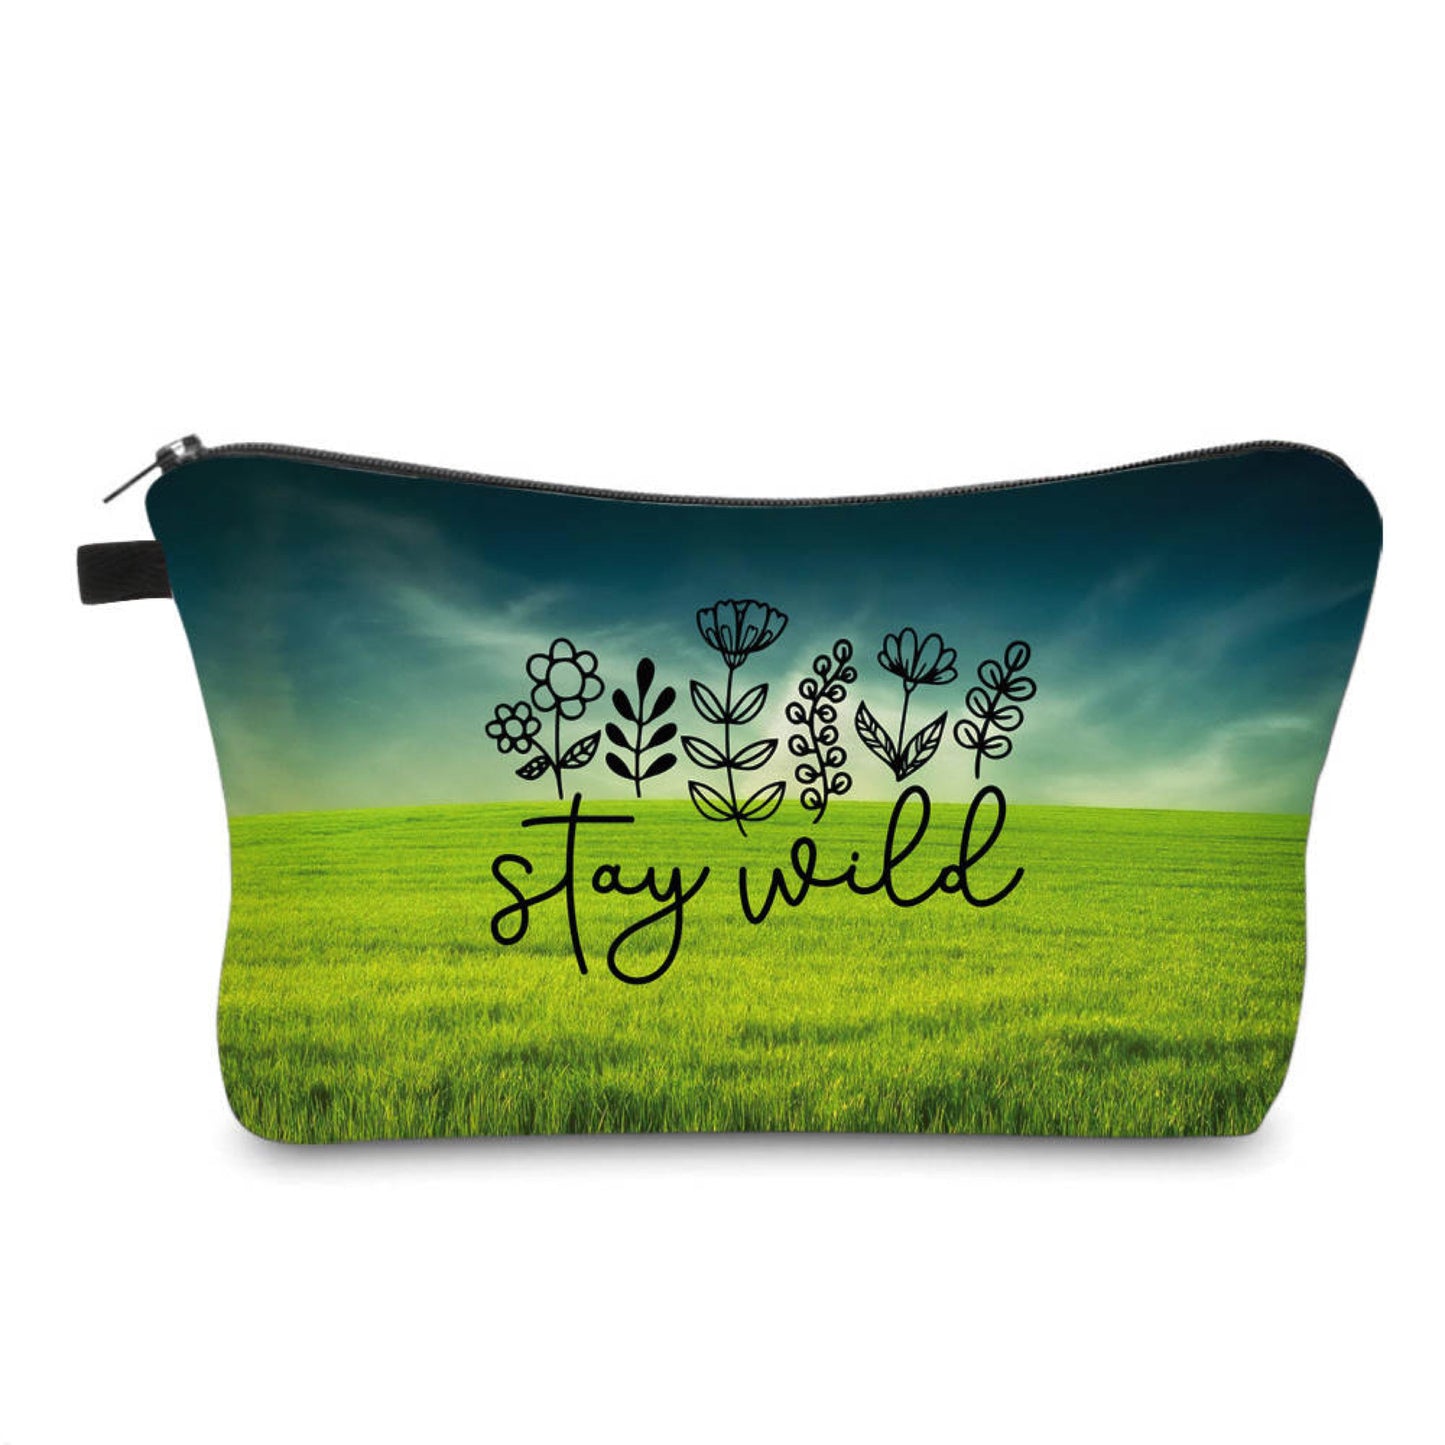 Stay Wild - Water-Resistant Multi-Use Pouch